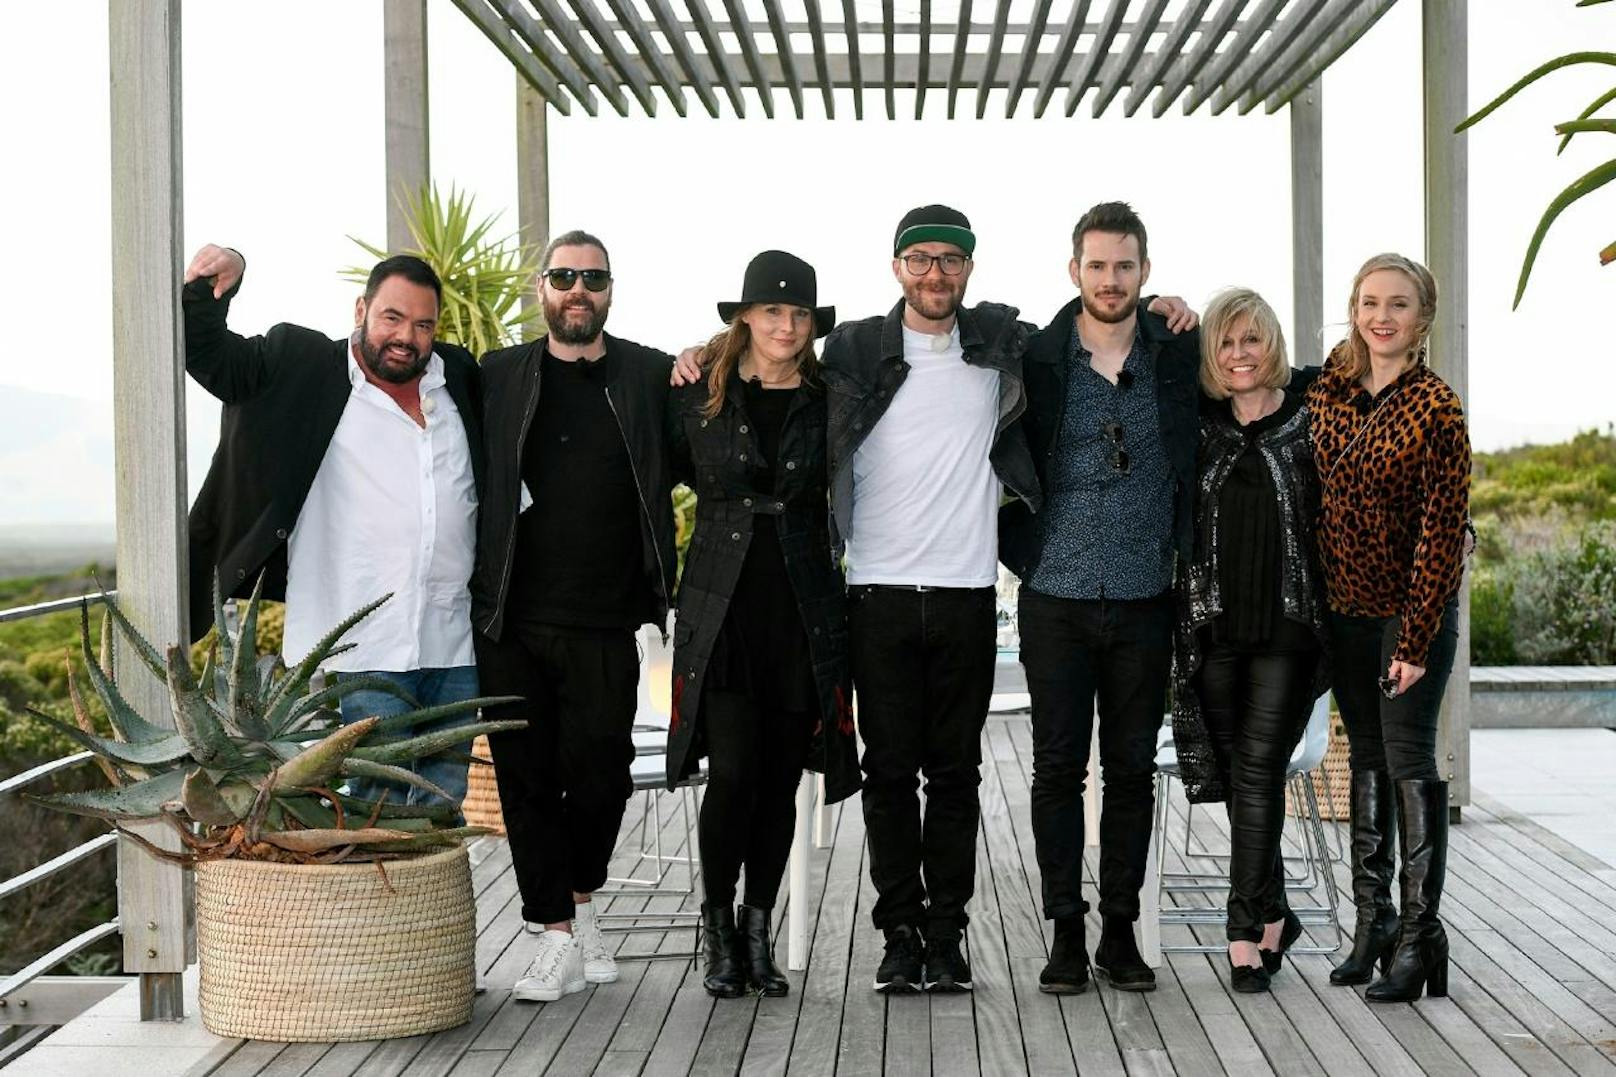 Marian Gold, Rea Garvey, Judith Holofernes, Mark Forster, Johannes Strate, Mary Roos, Leslie Clio